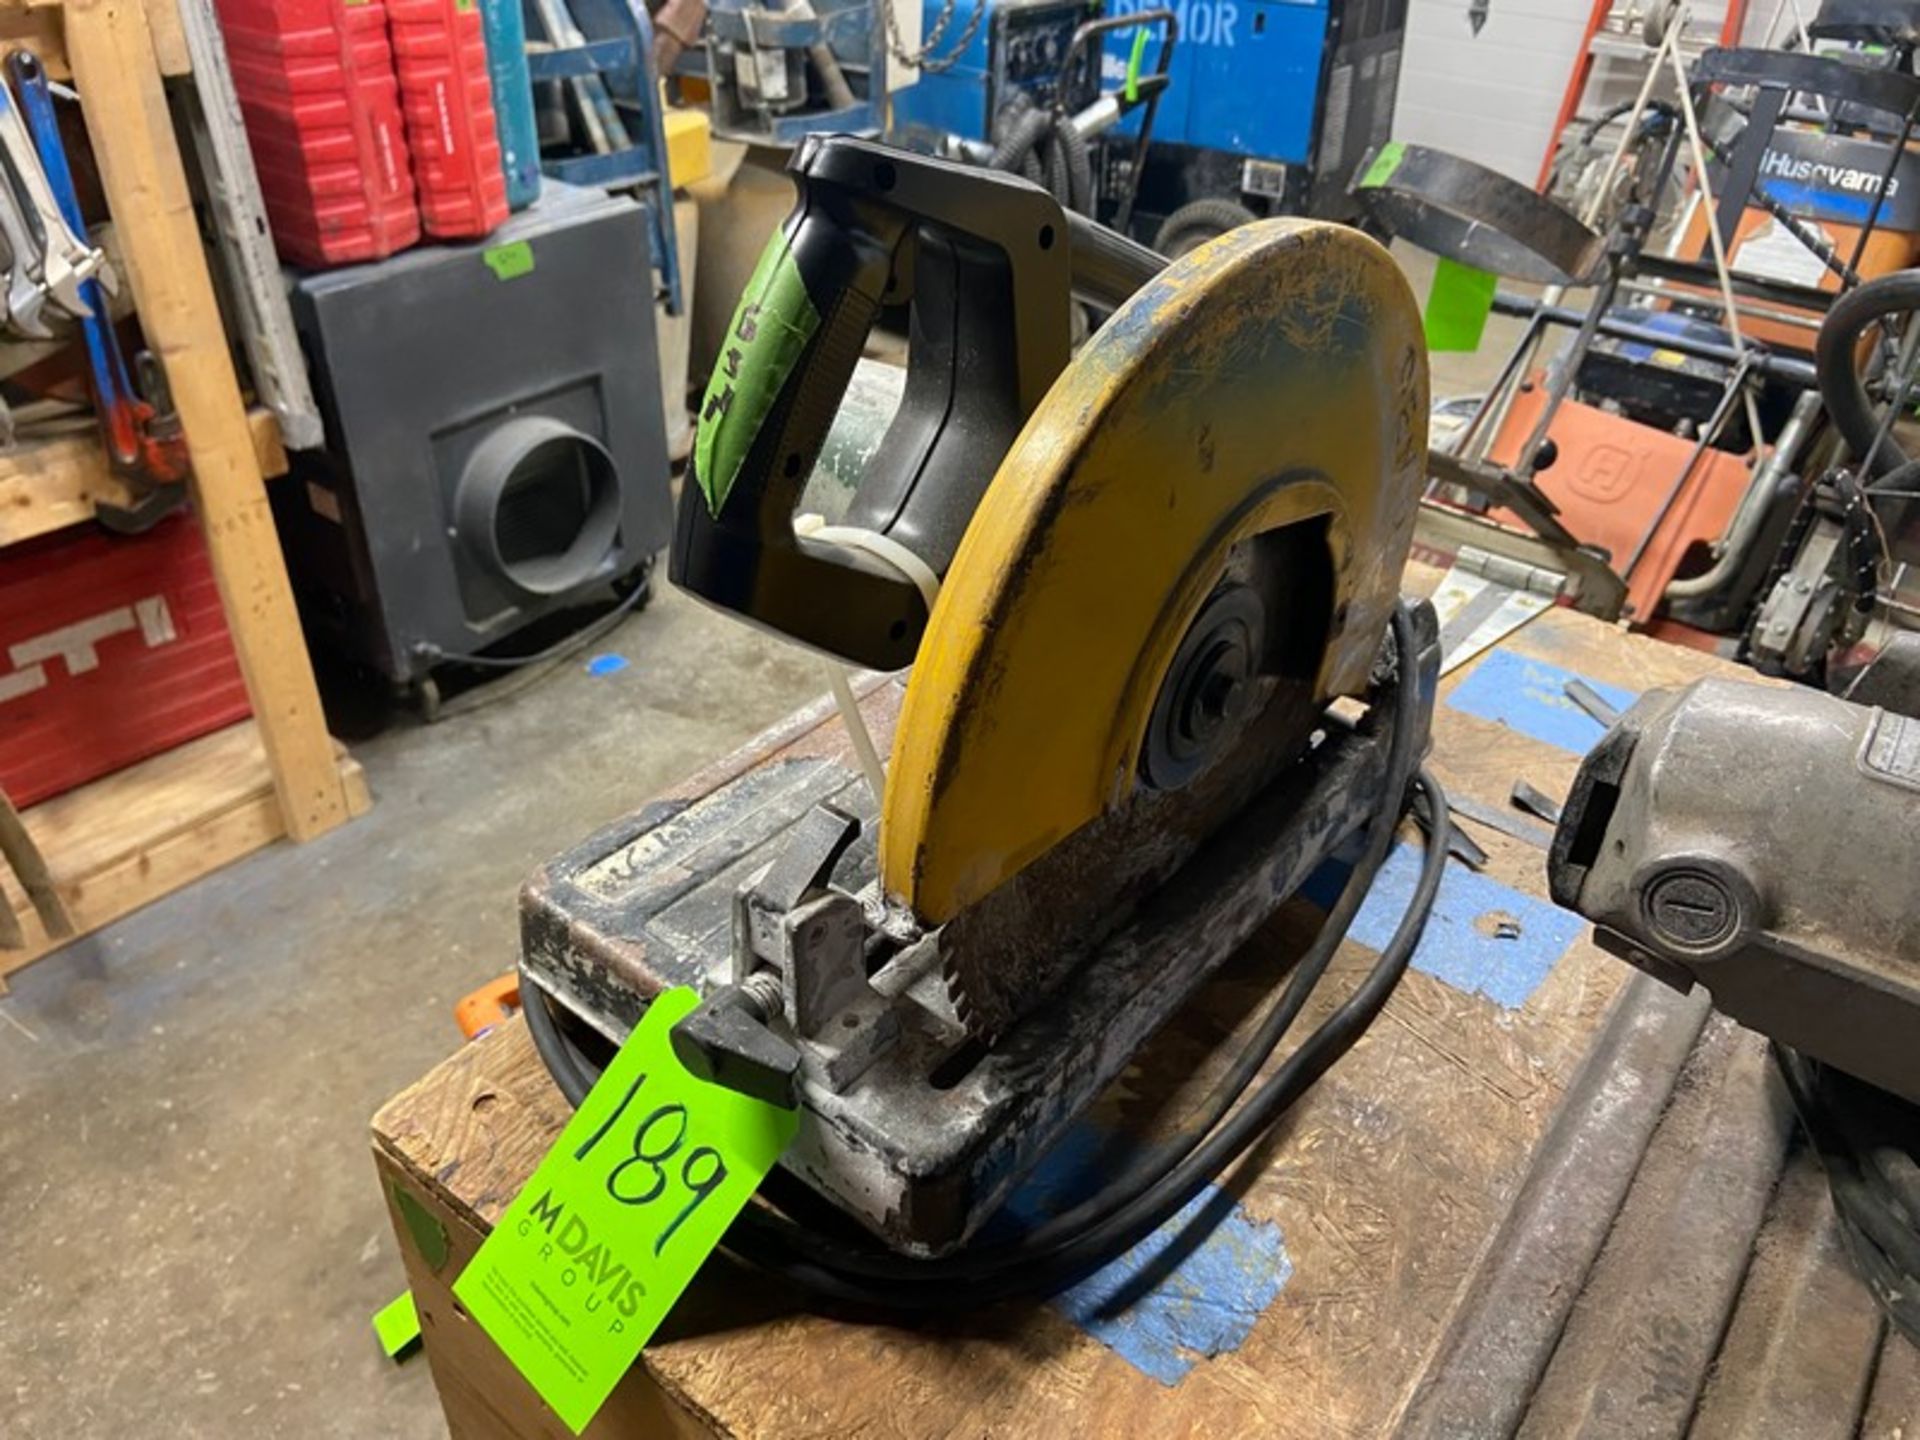 DeWalt 14” Chop Saw, S/N 89600, 120 Volts, 3800 RPM (LOCATED IN MONROEVILLE, PA)(RIGGING, LOADING, &